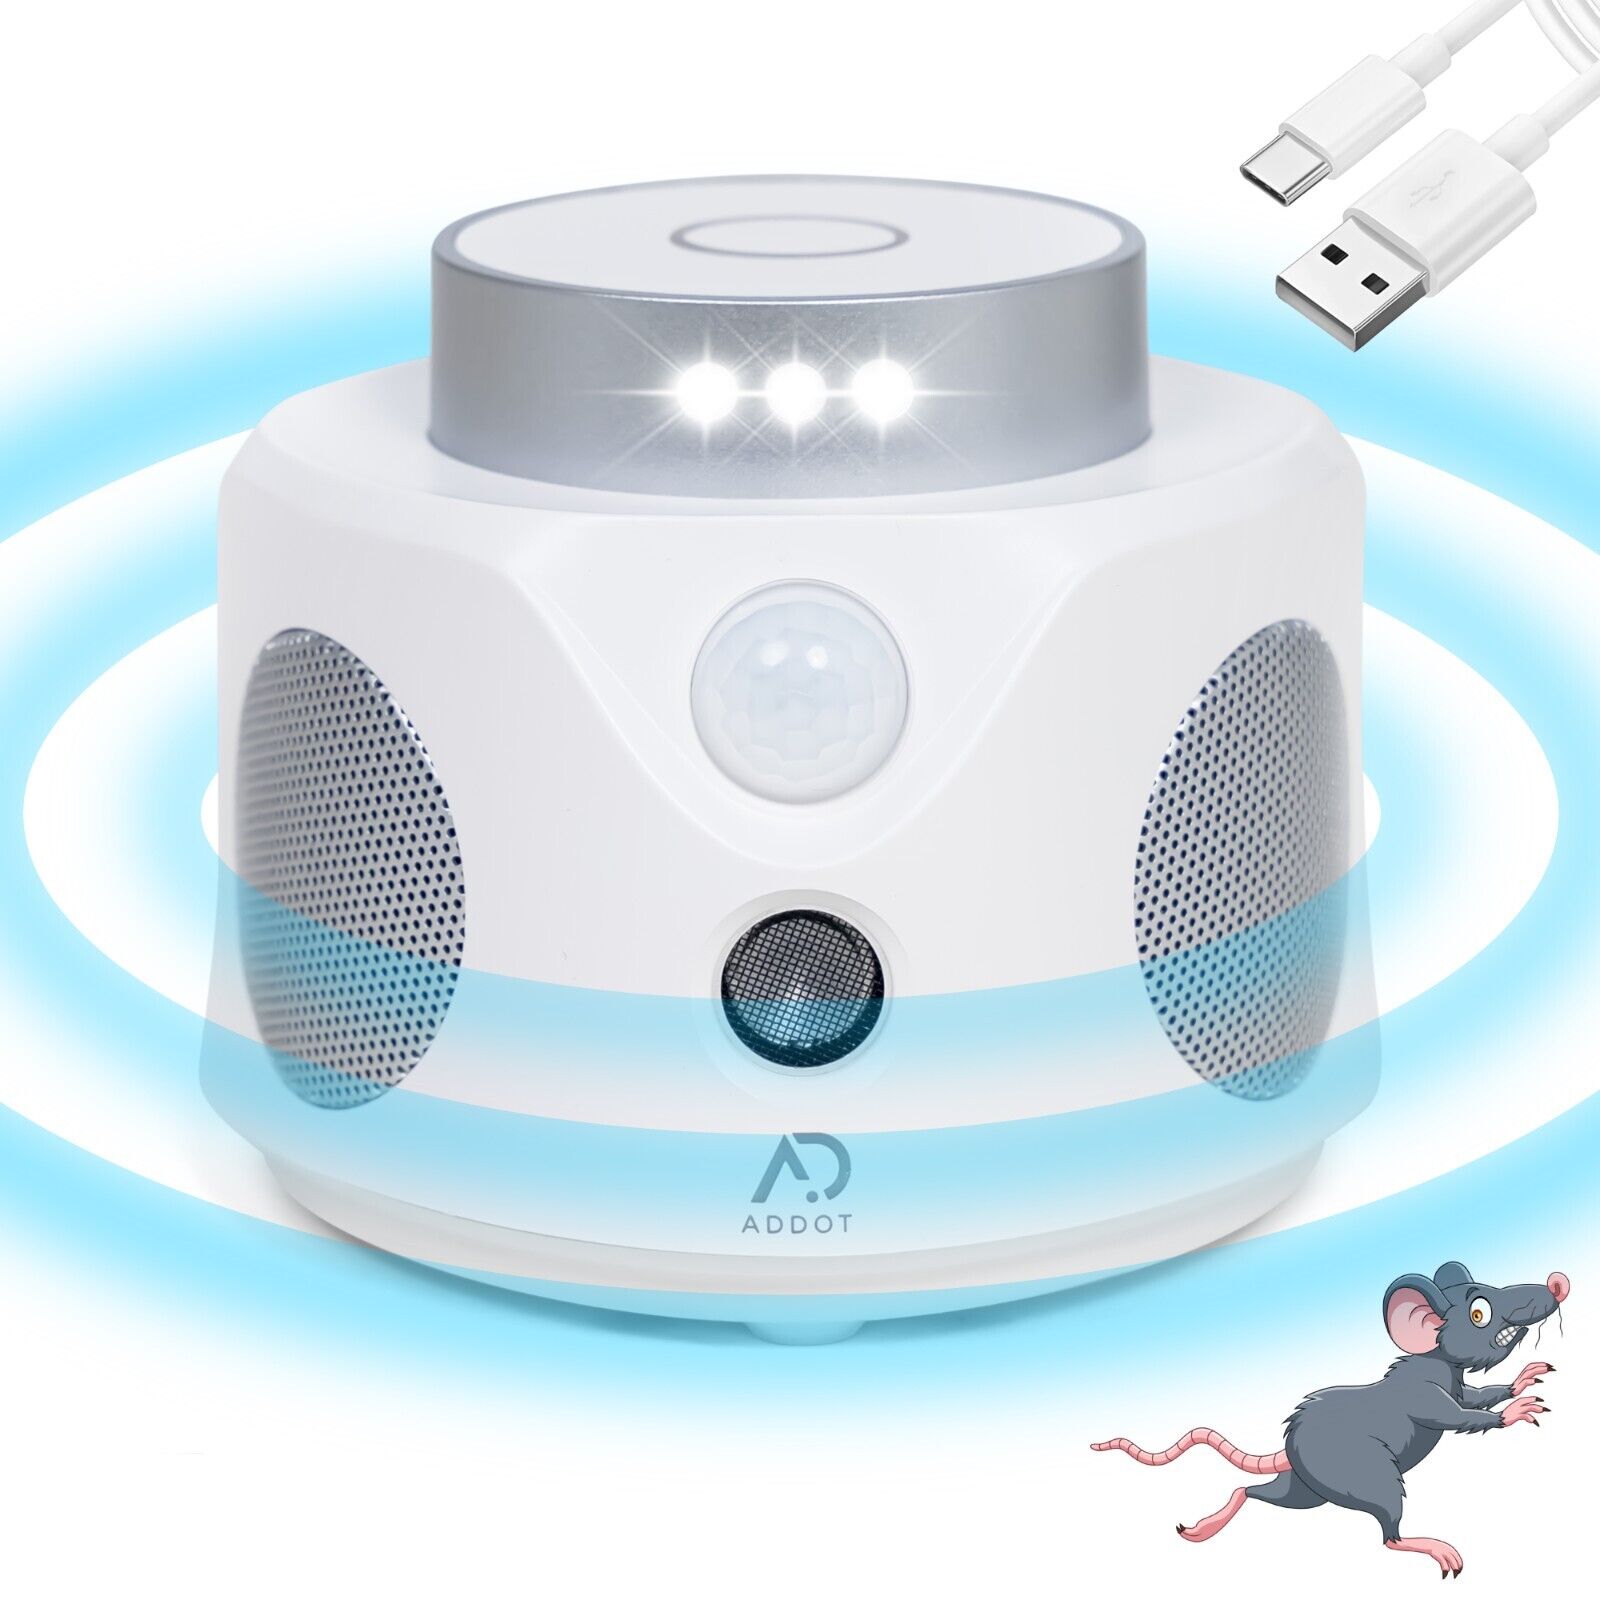 New upgraded Super Strong Ultrasonic Auto Detect Pest Rodent Mouse Repellent